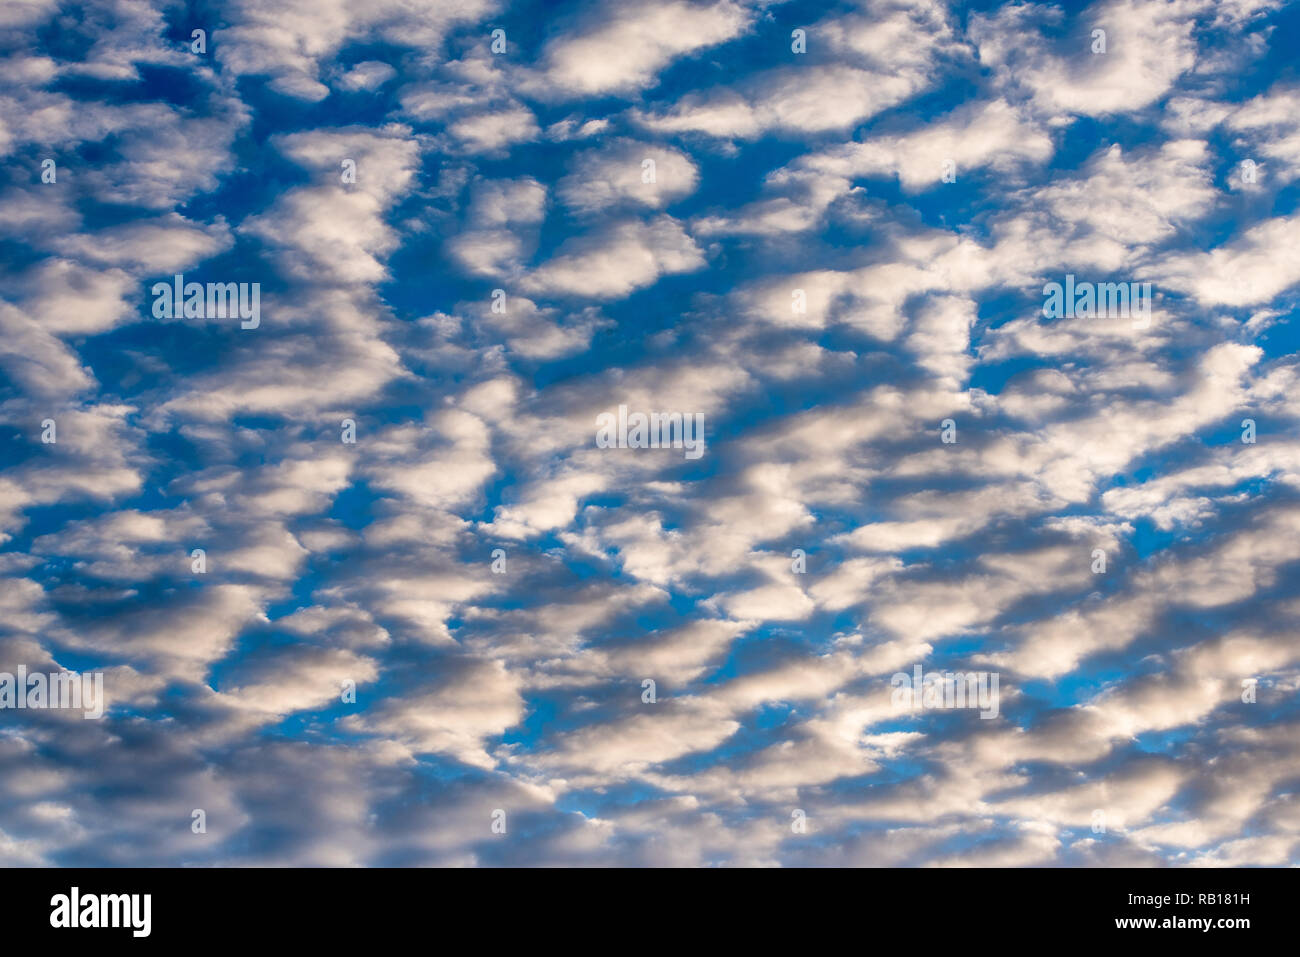 pattern of white clouds in blue sky als background Stock Photo